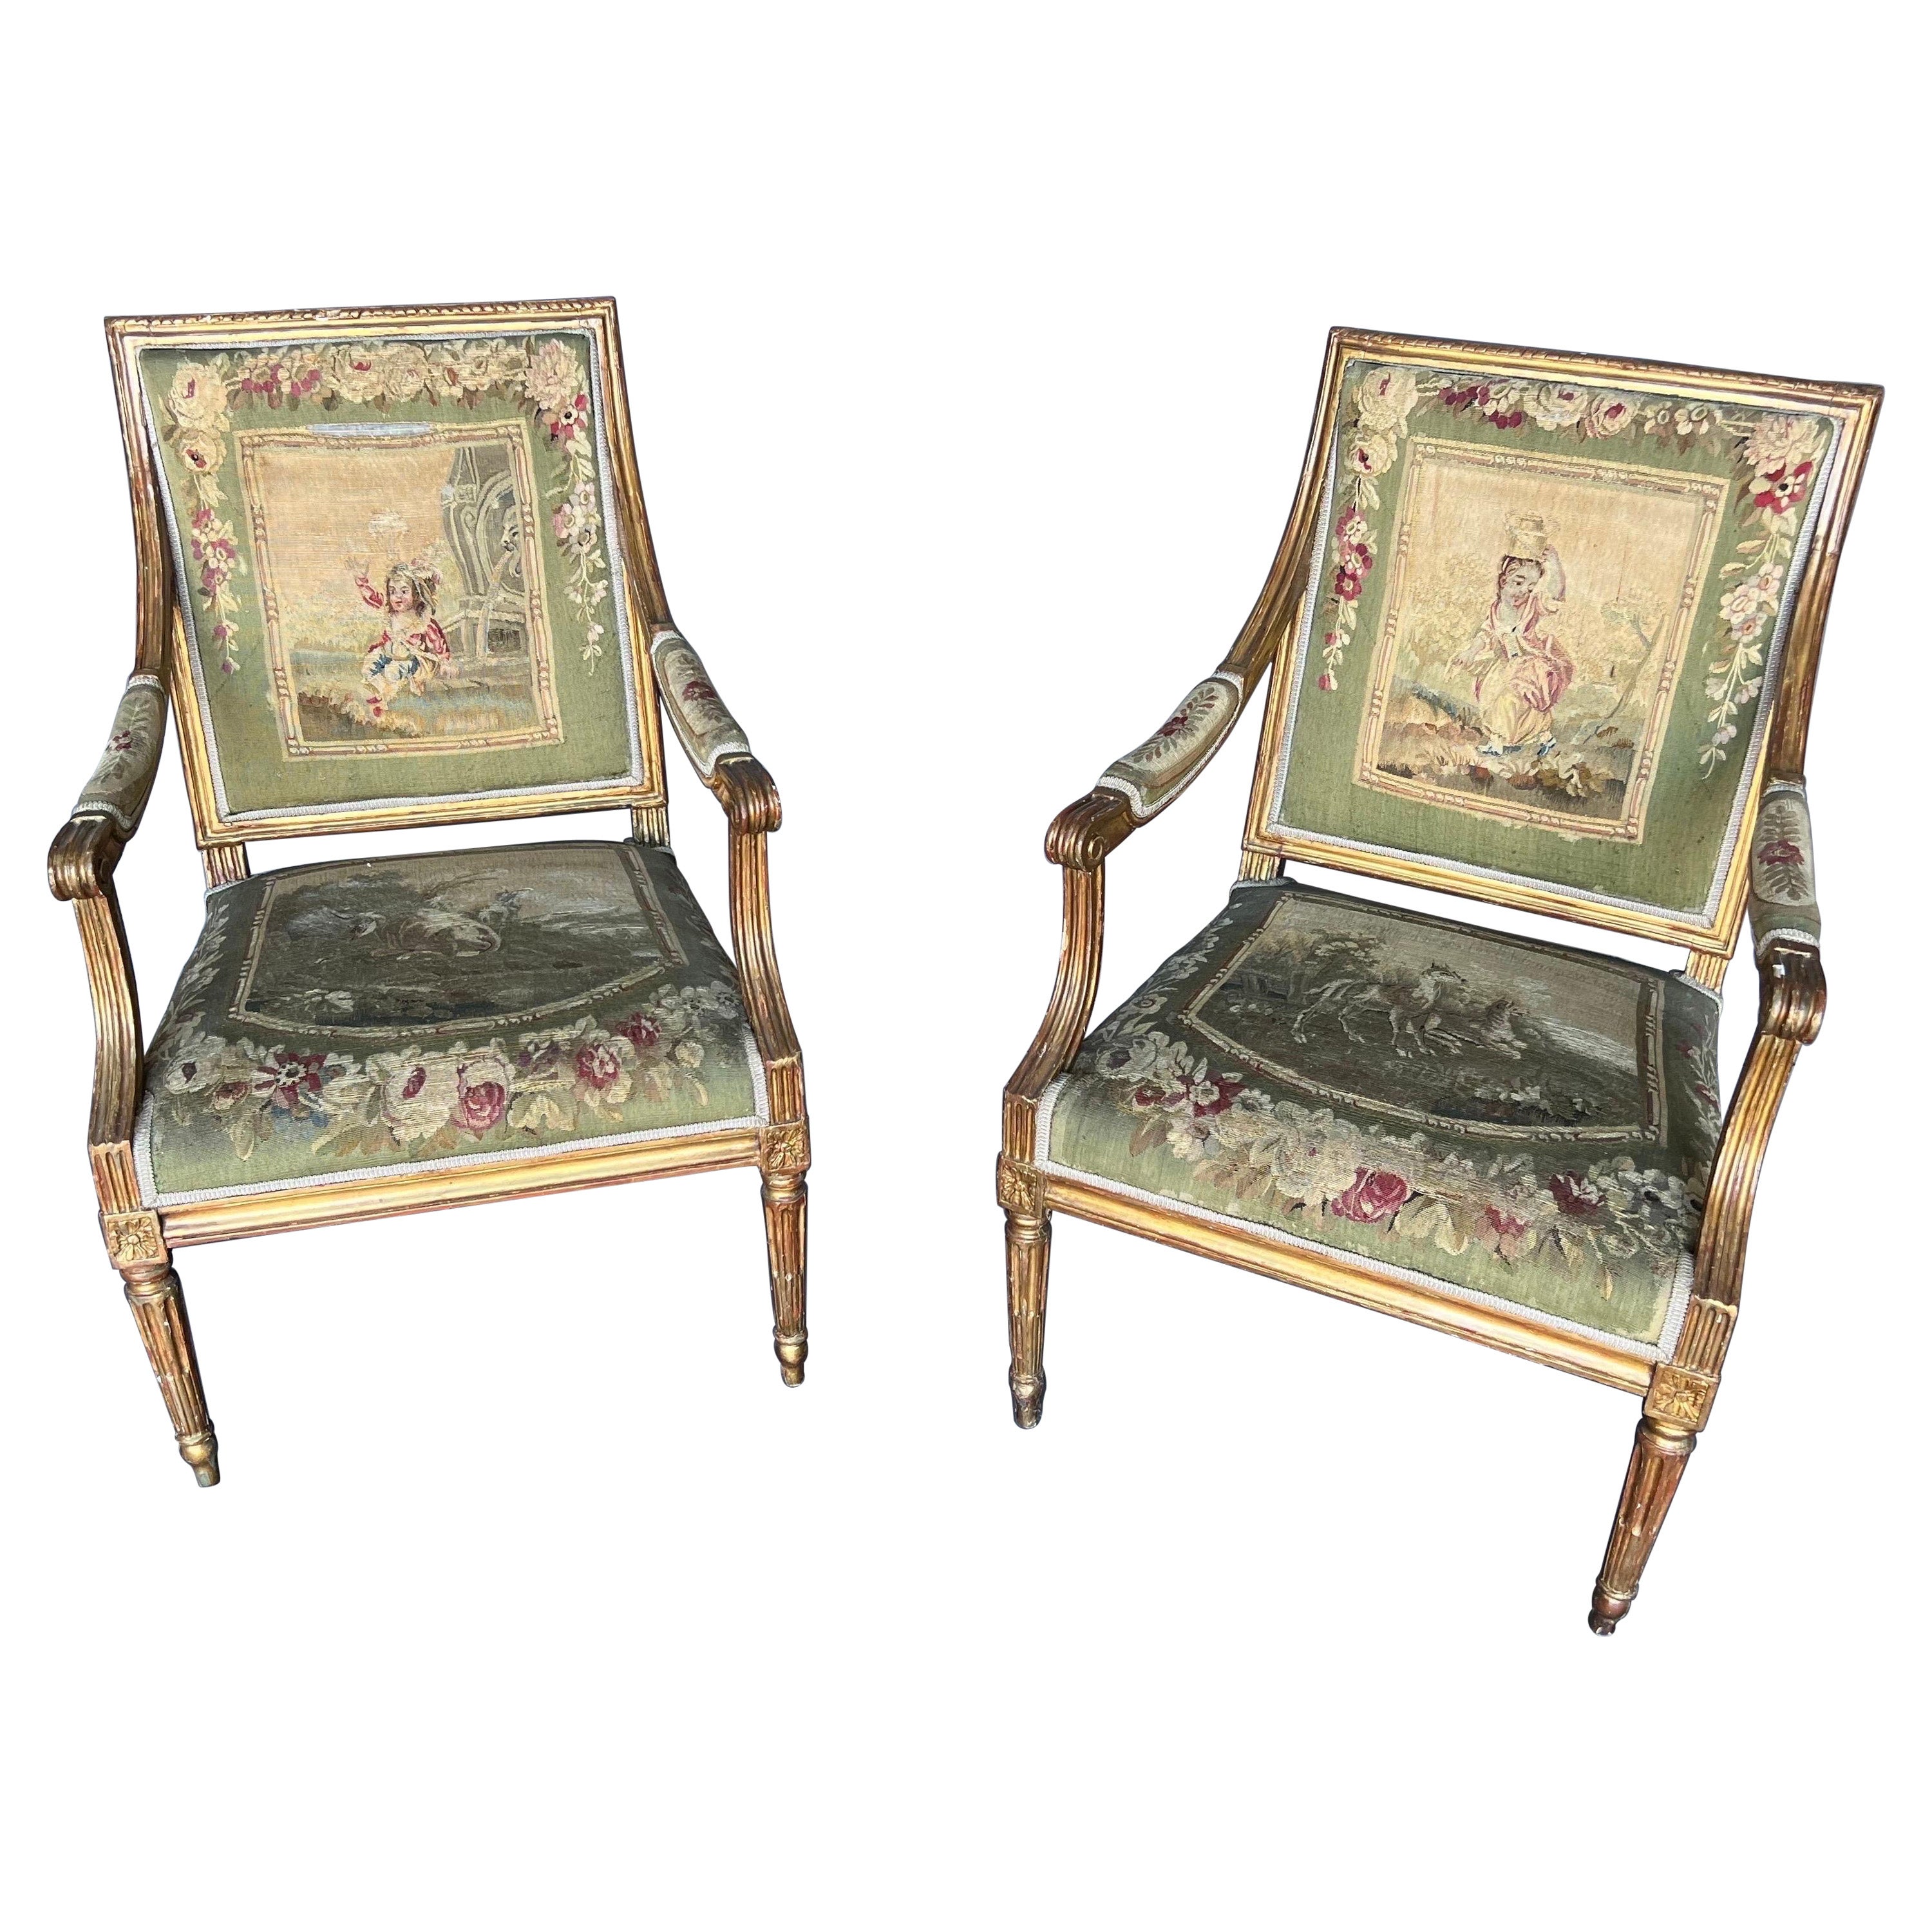 Fine pair of 18th century French Aubusson upholstered Fauteuils